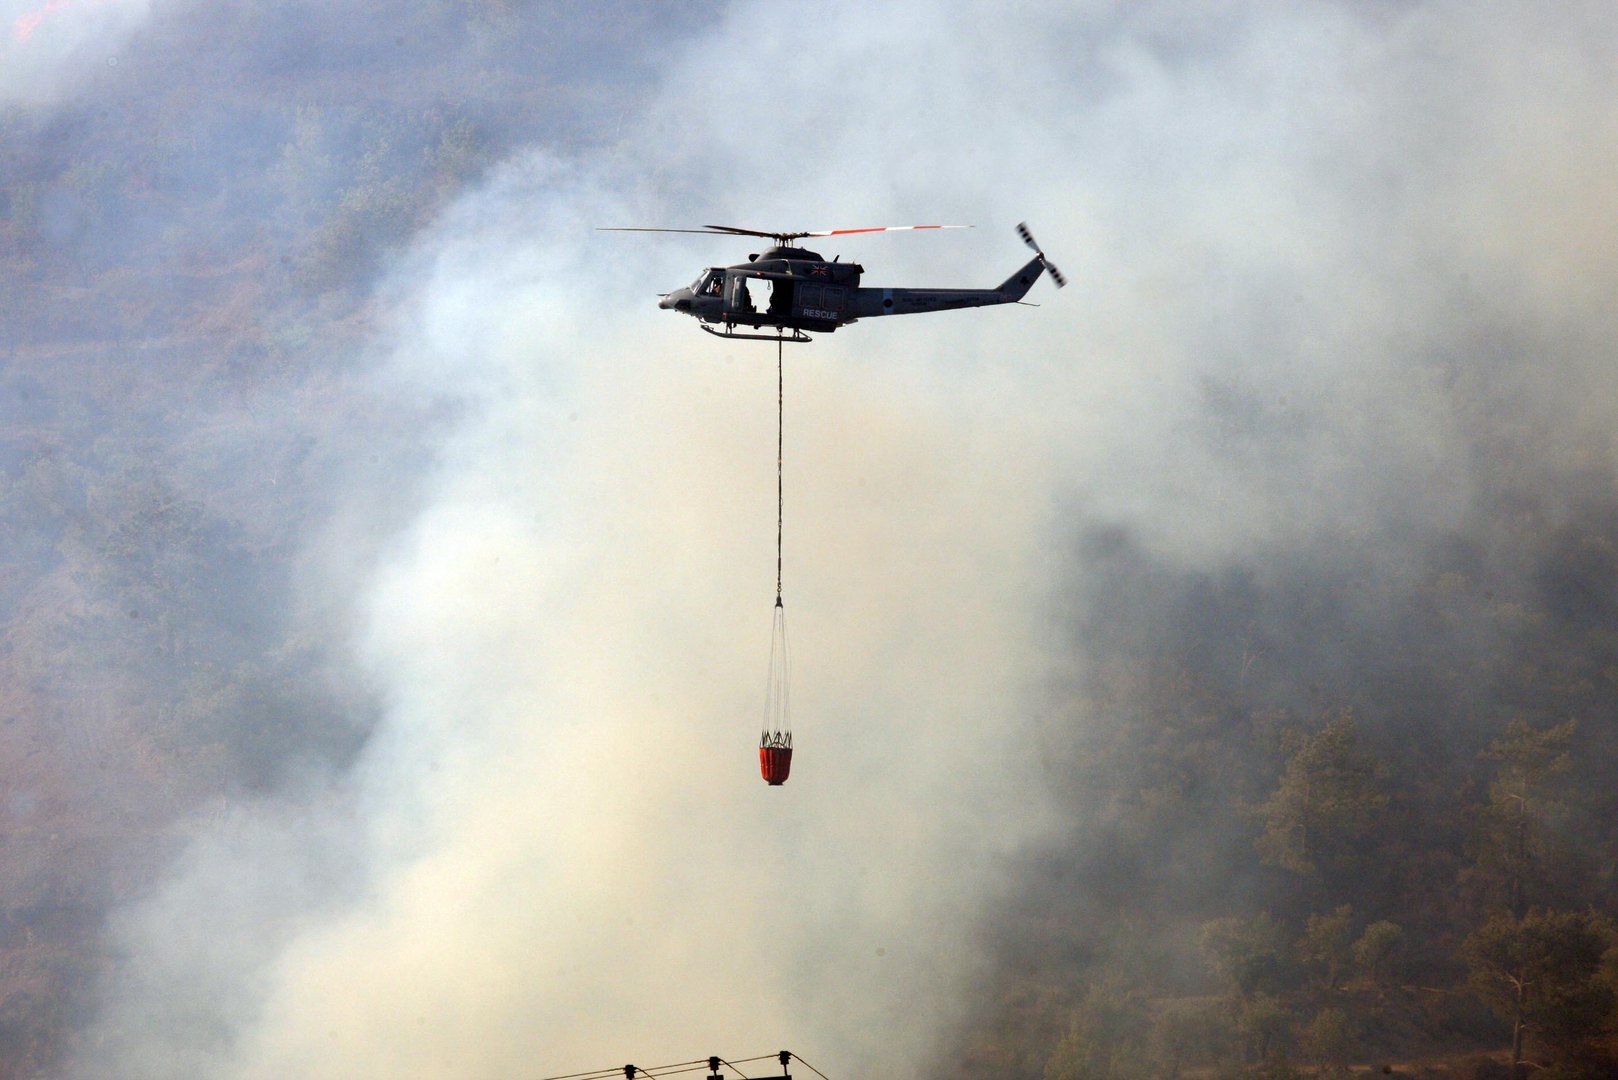 image Cyprus seeks EU exemption from Russia sanctions to meet firefighting needs